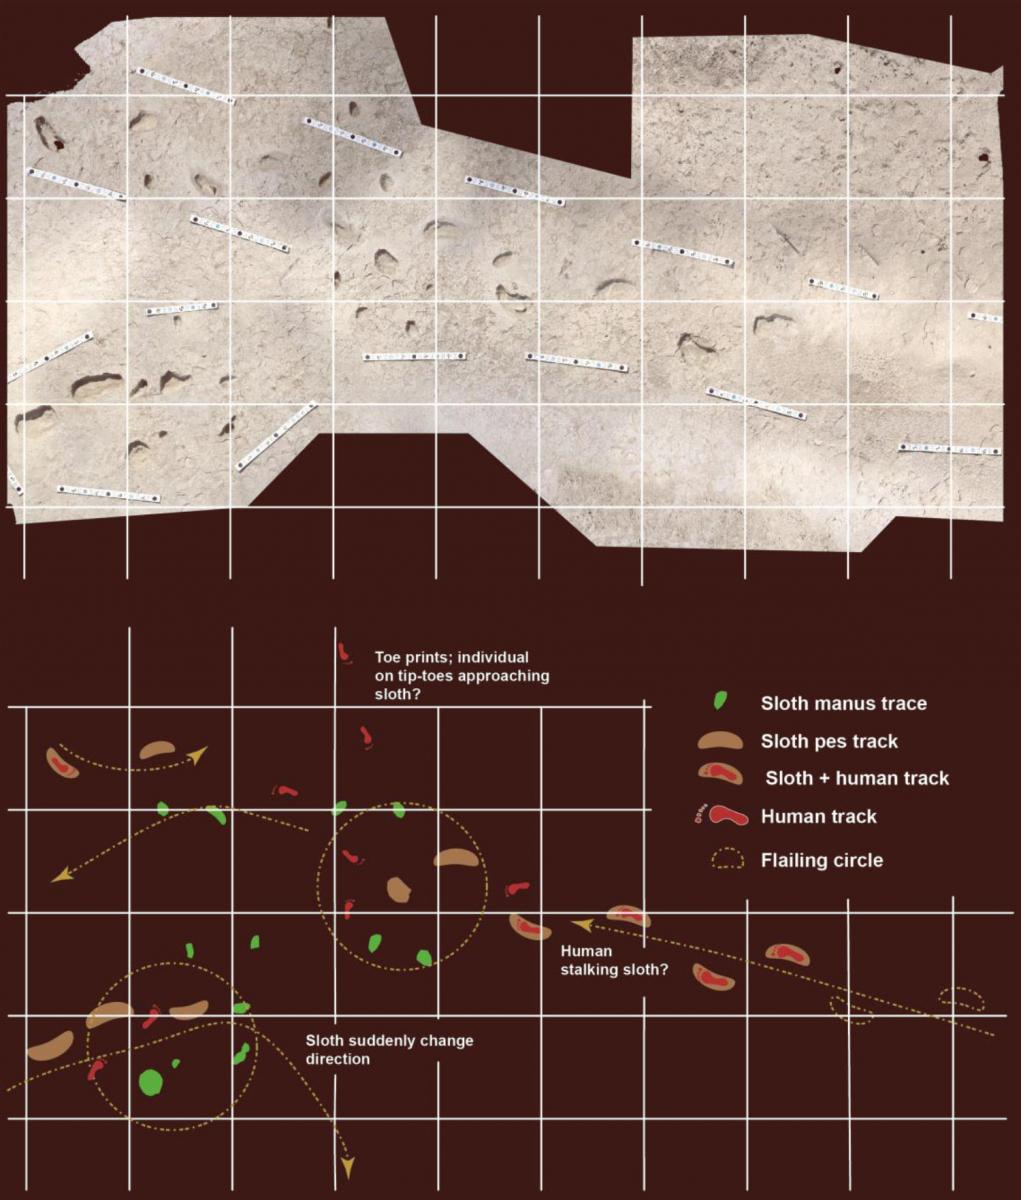 Top: mosaic of part of the study site showing two ‘flailing circles’ as well as sloth and human composite tracks. Bottom: interpretation of trackway trajectories. Image credit: Bustos et al, doi: 10.1126/sciadv.aar7621.